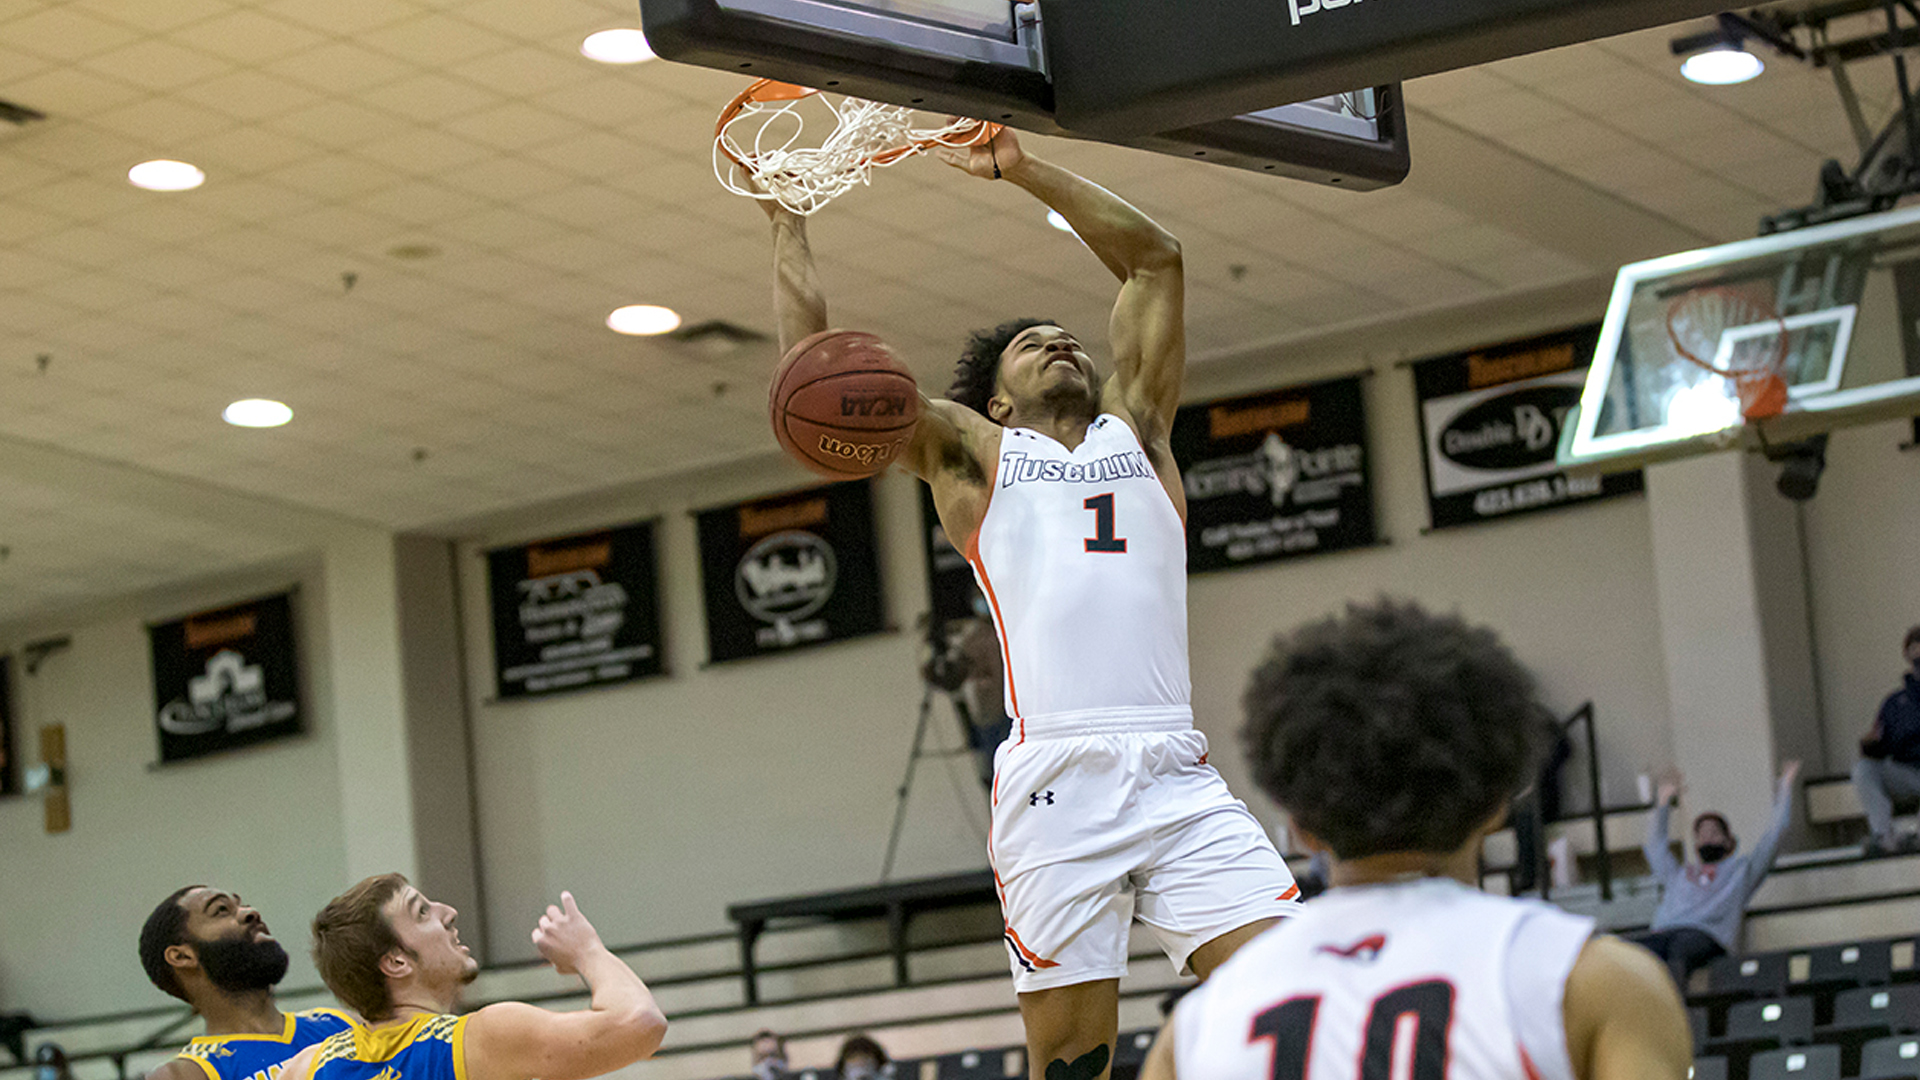 Justin Mitchell scored a career-high 15 points, including this dunk in Tusculum's 78-75 win over Mars Hill (photo by Chuck Williams)